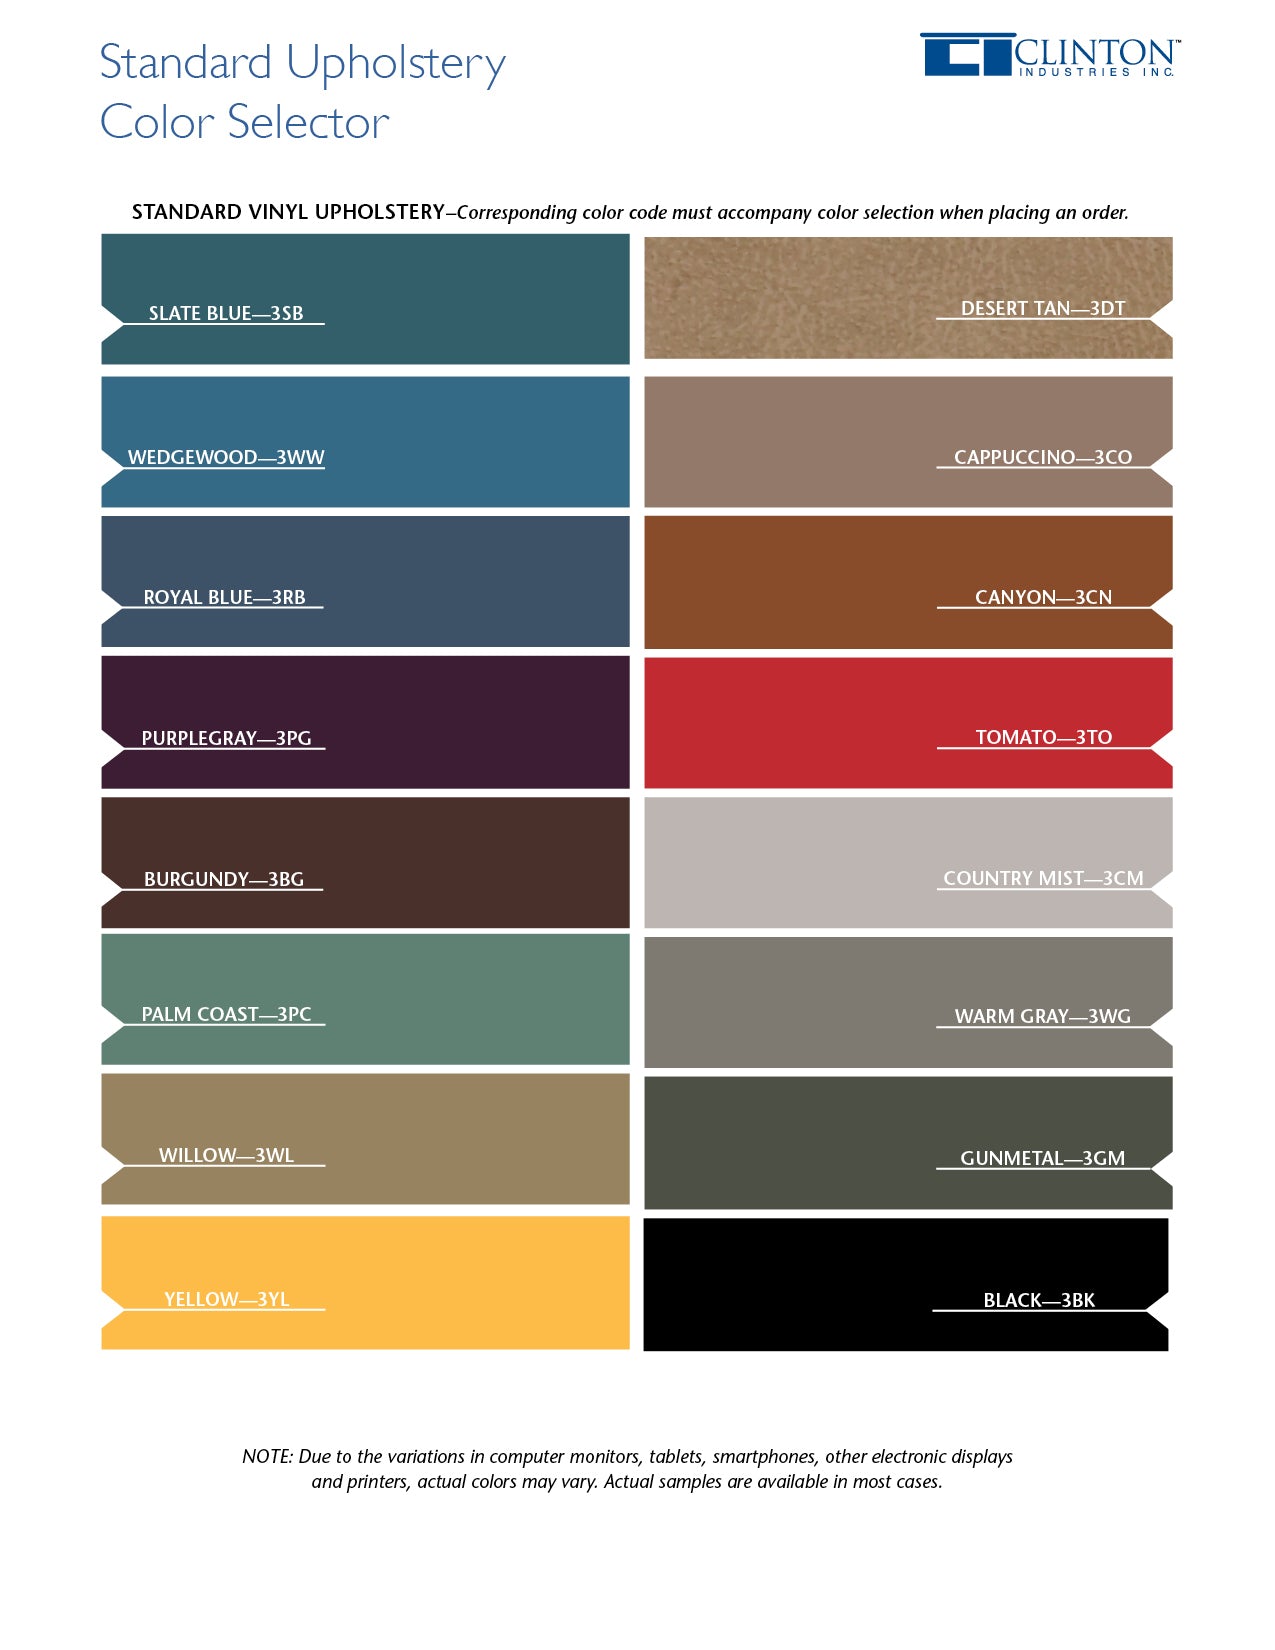 Standard Upholstery Color Selector